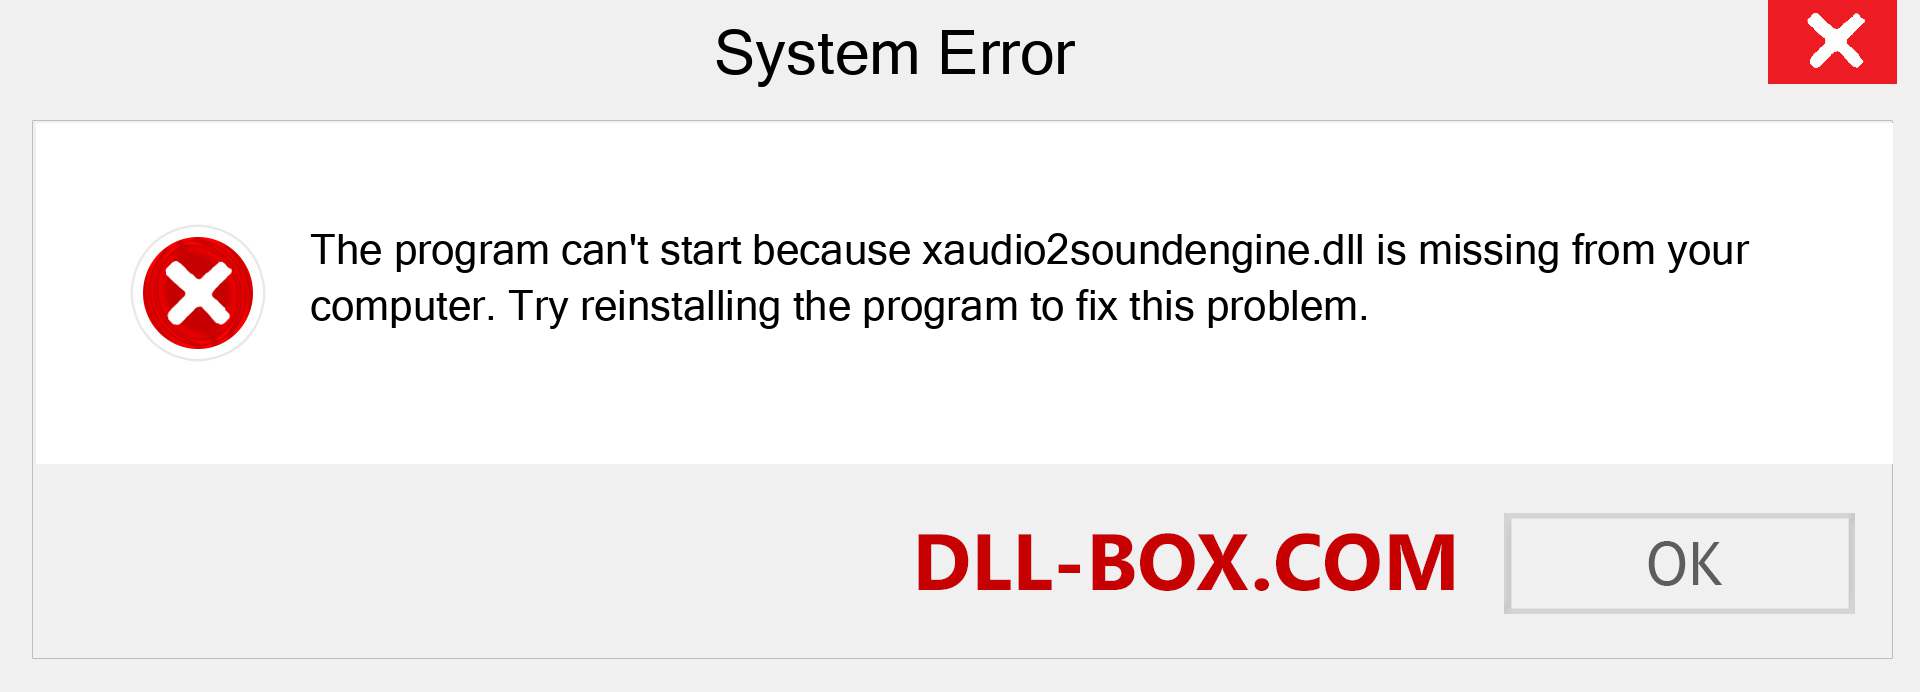  xaudio2soundengine.dll file is missing?. Download for Windows 7, 8, 10 - Fix  xaudio2soundengine dll Missing Error on Windows, photos, images